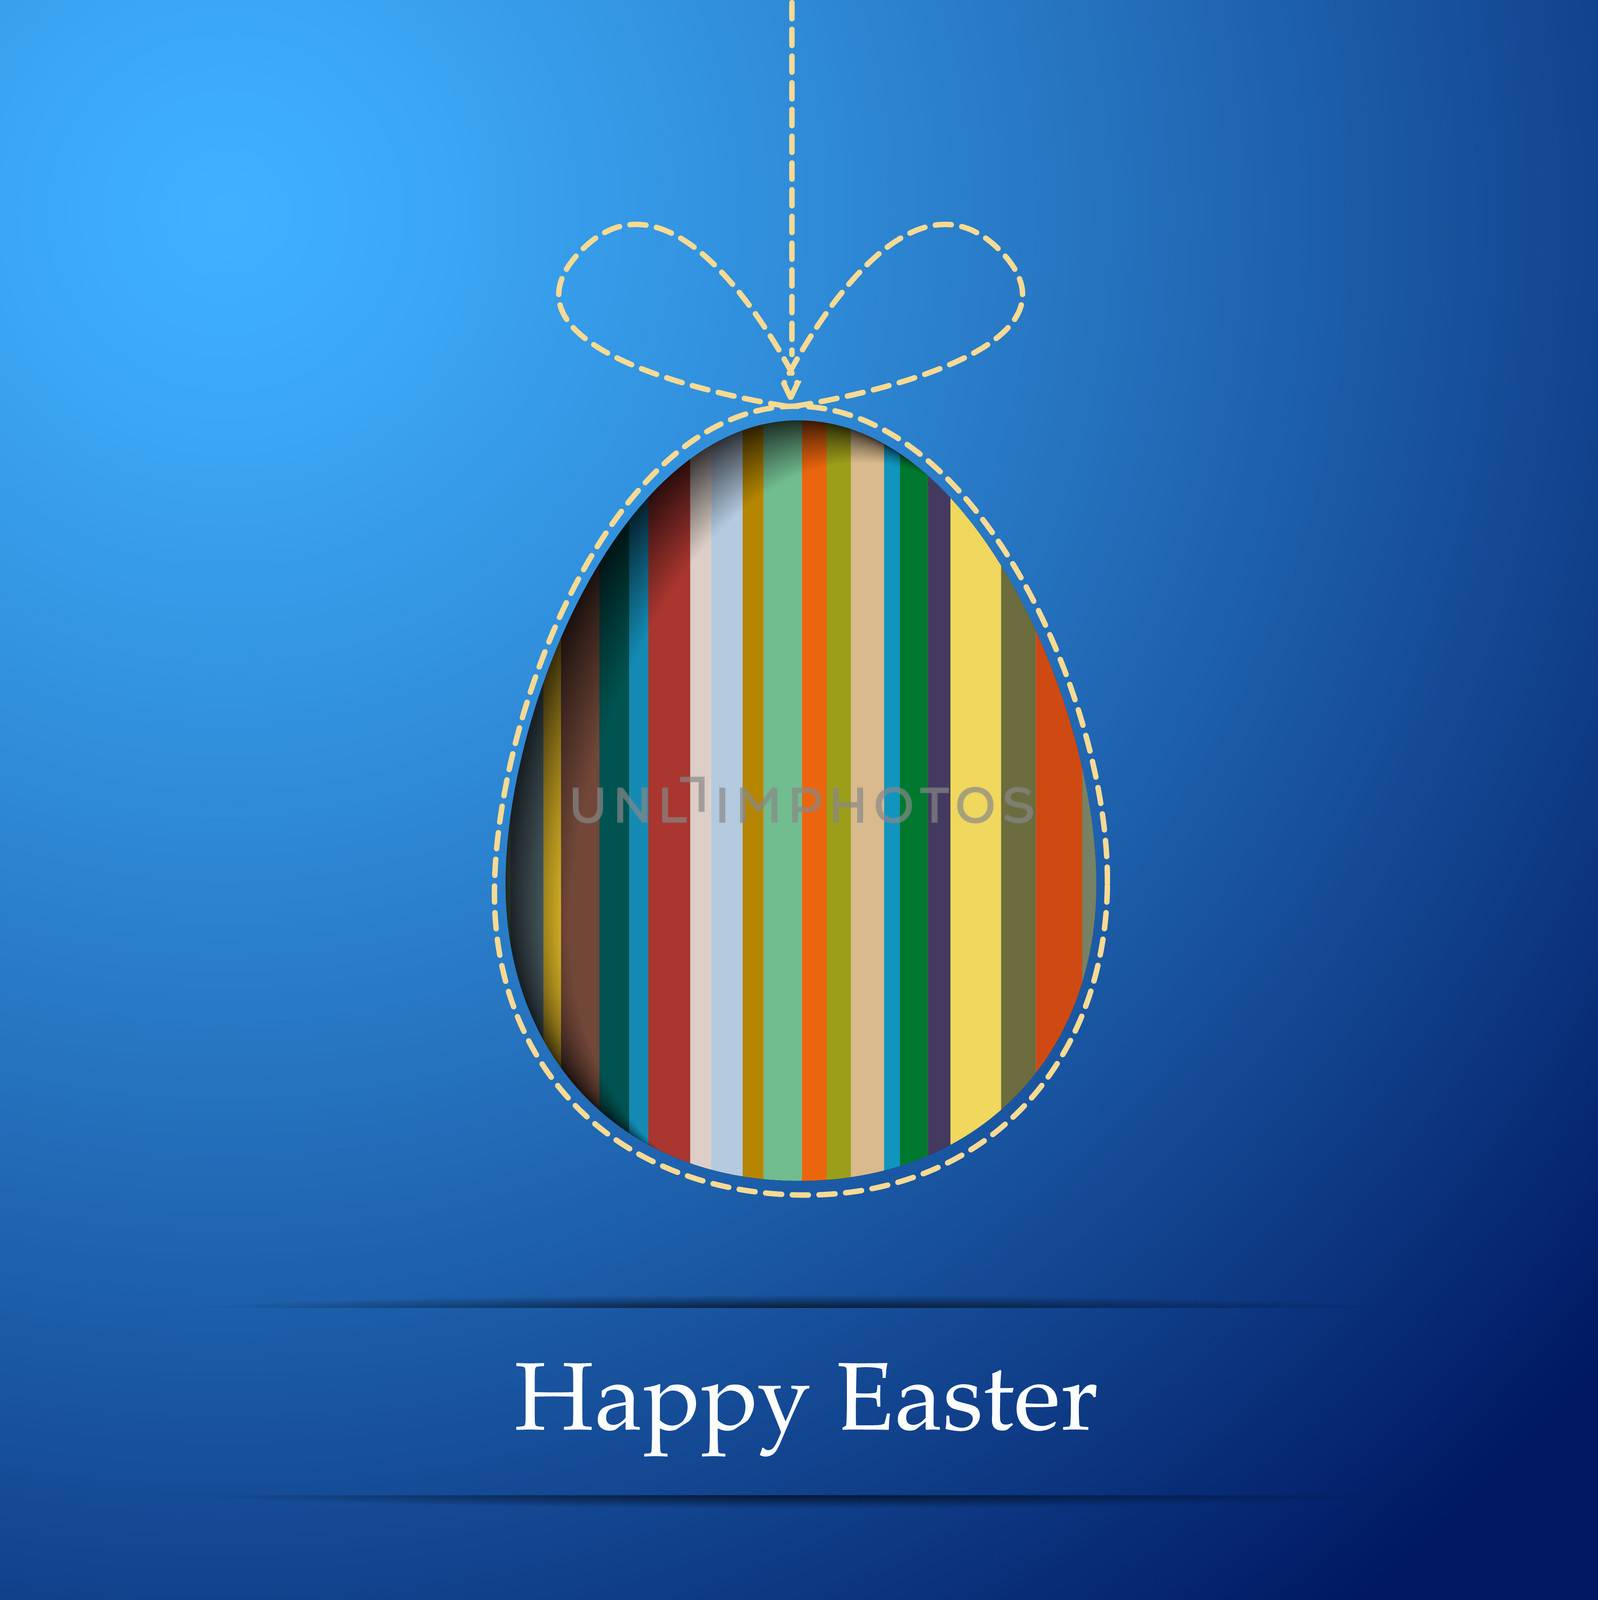 A striped egg on a blue background